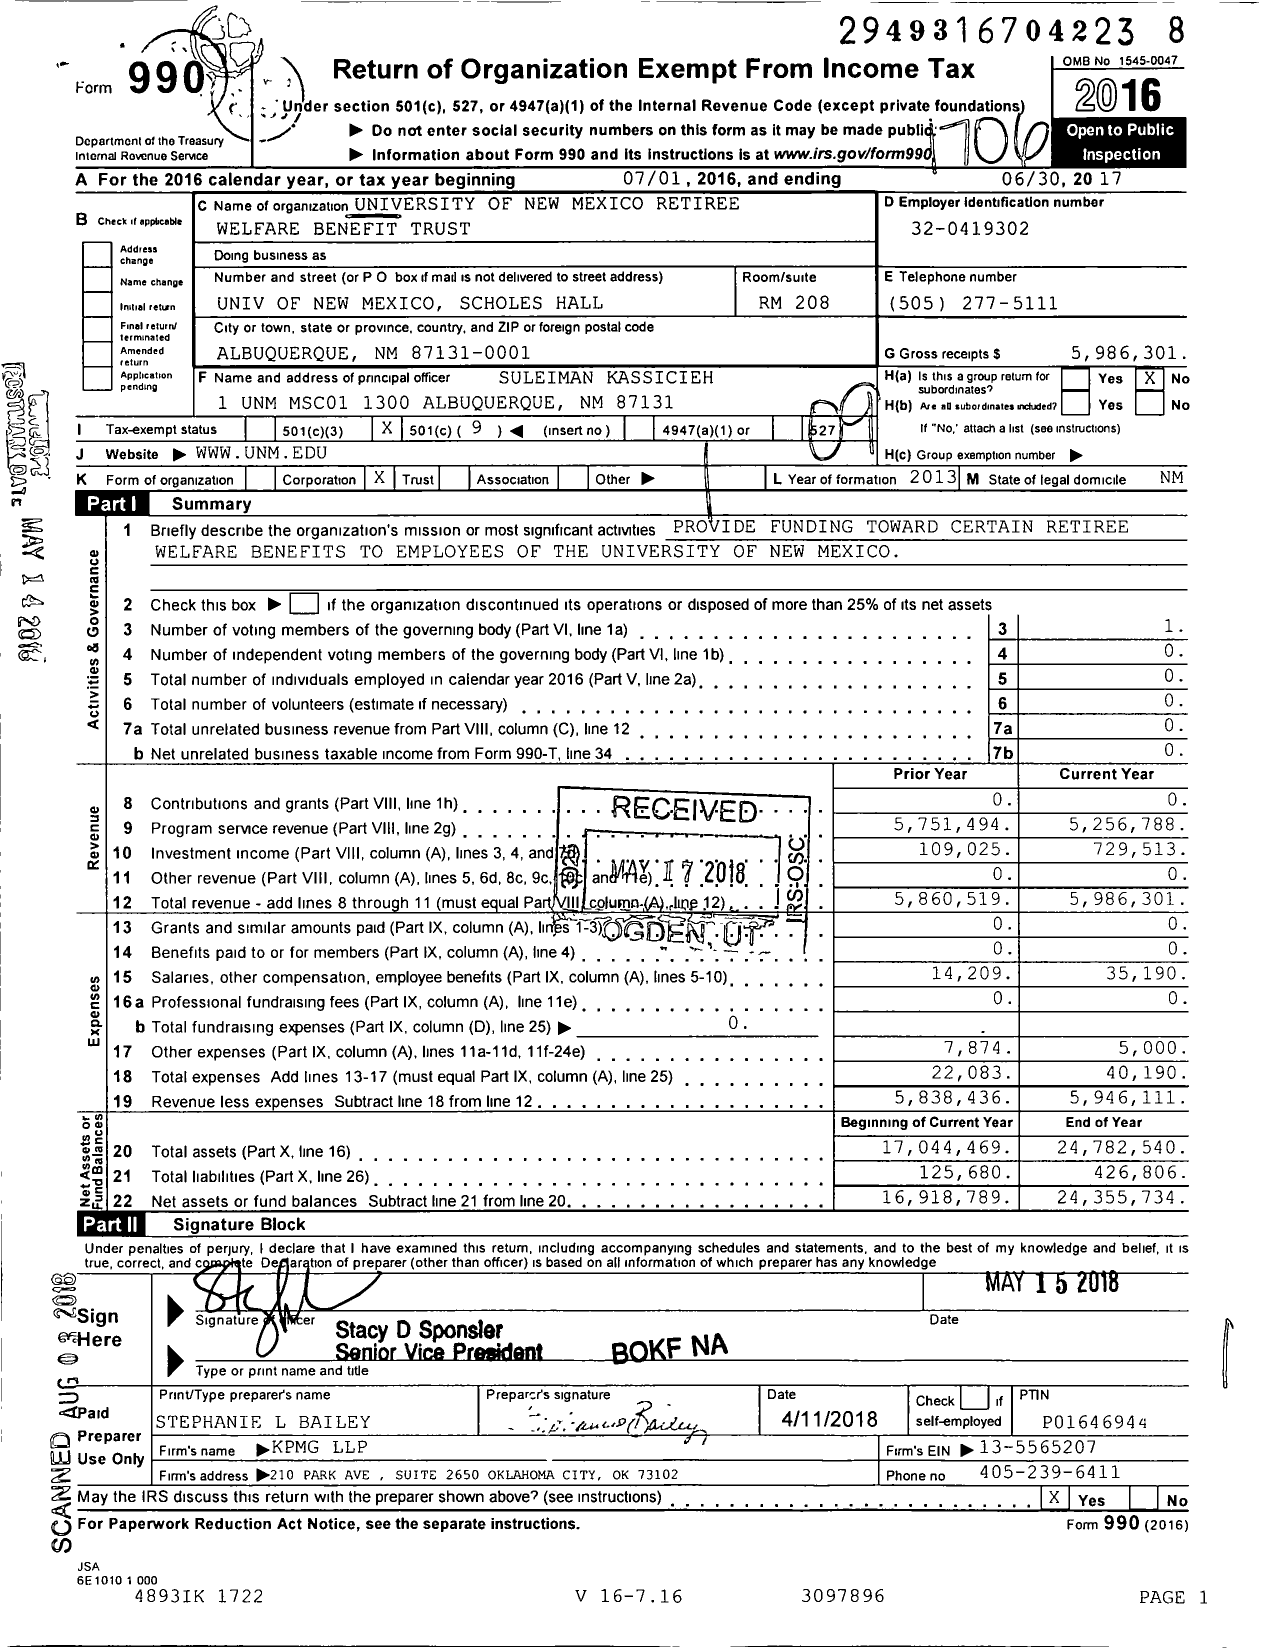 Image of first page of 2016 Form 990O for University of New Mexico Retiree Welfare Benefit Trust